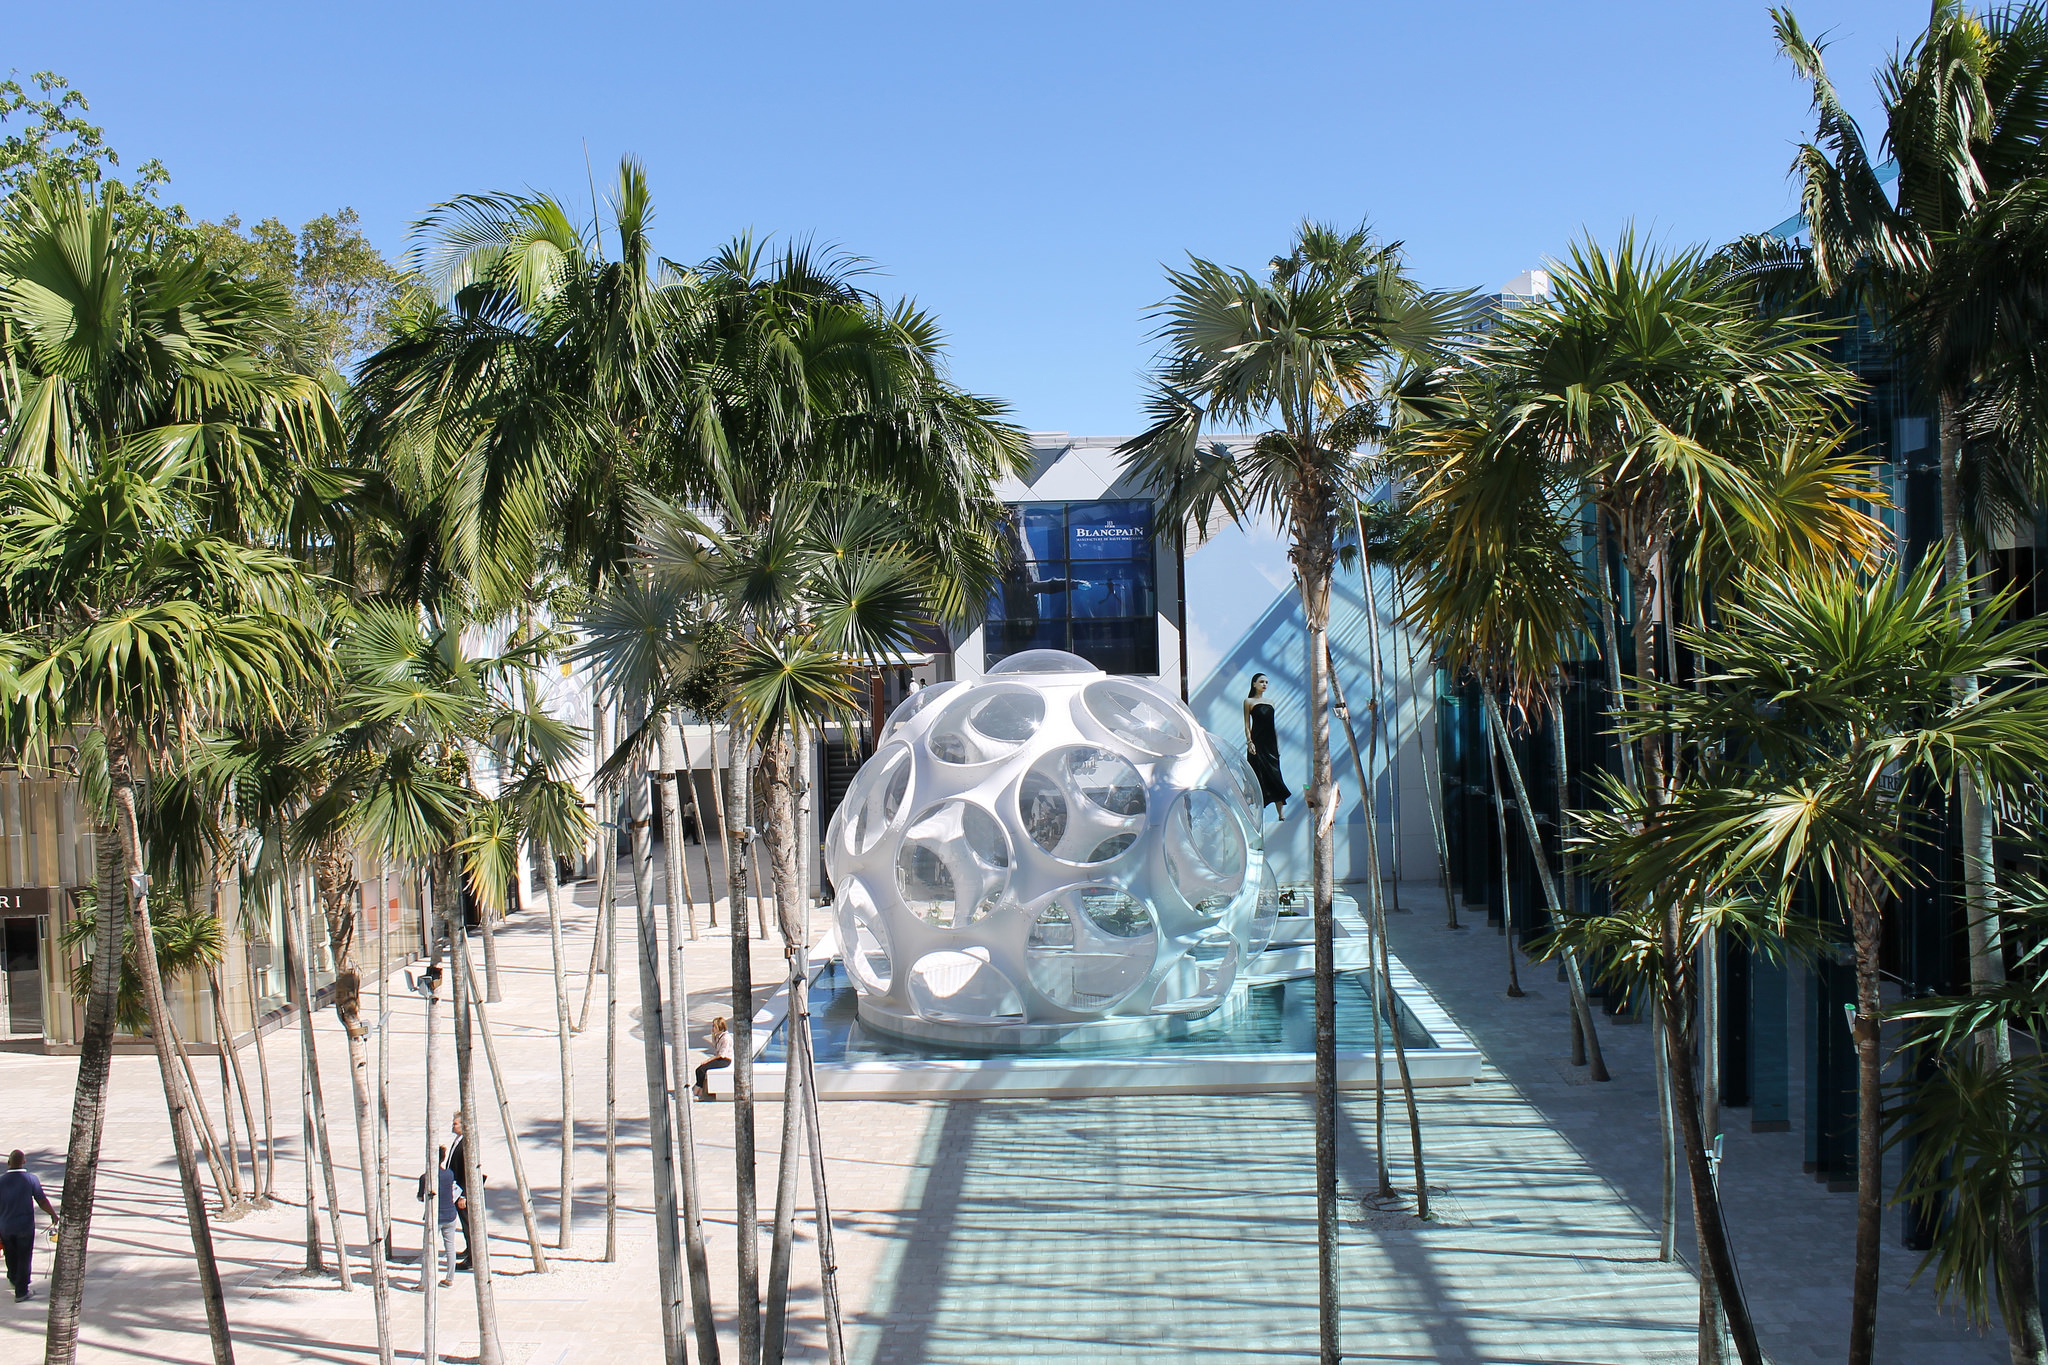 Miami Design District Travel Tips - Best Hotels, Restaurants, Shopping and  Things to do in Miami, Florida